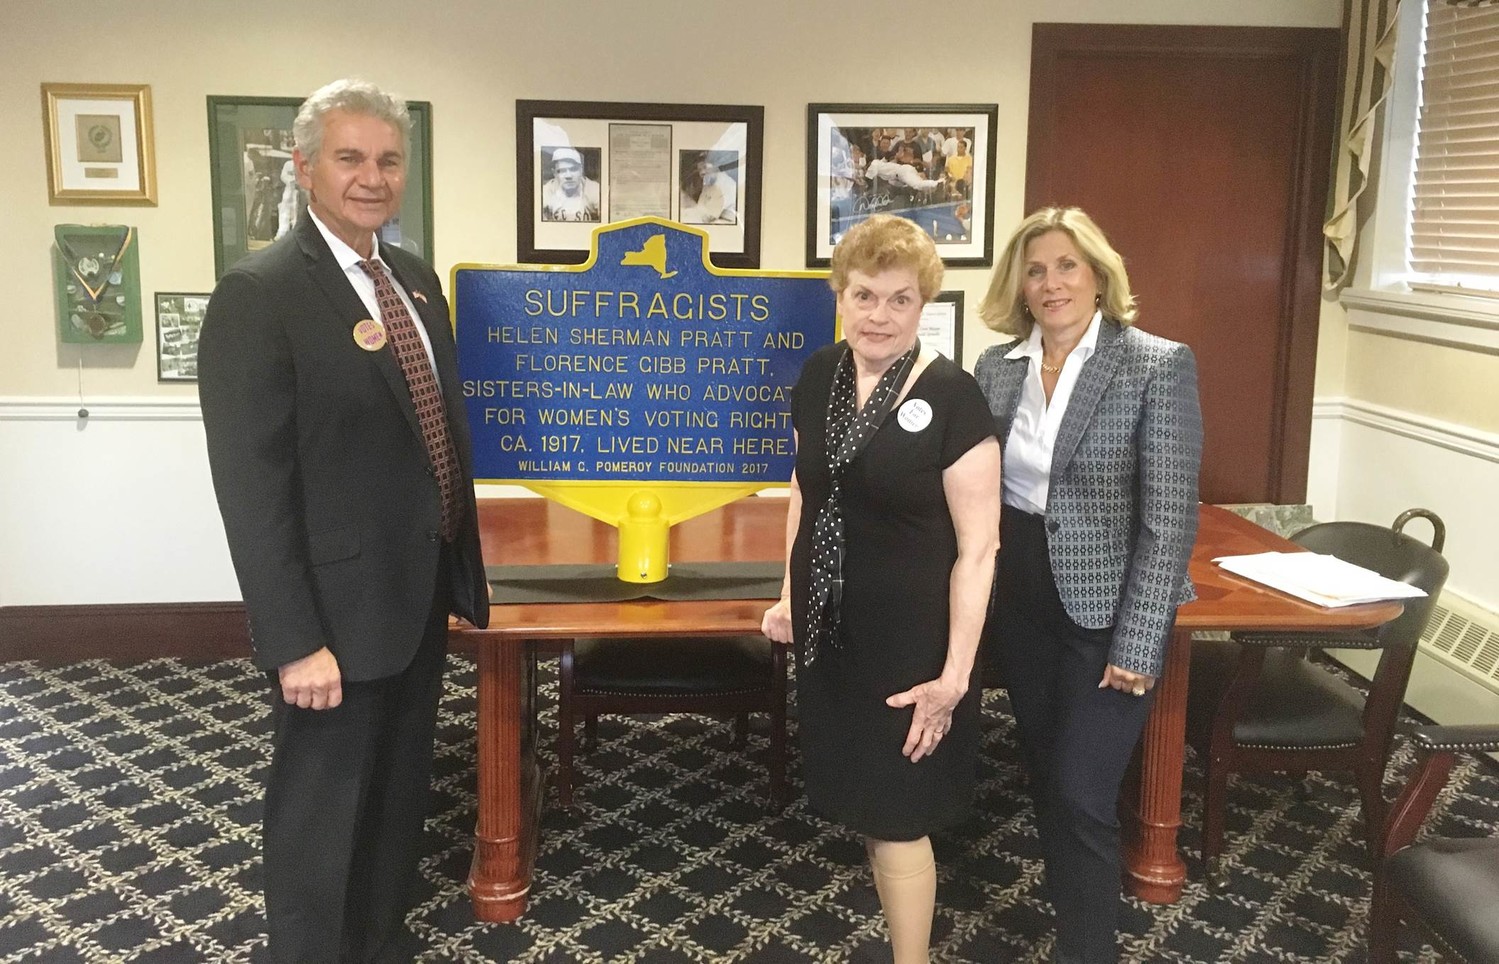 Mayor Reggie Spinello, founder of The Long Island Woman Suffrage Association Antonia Petrash and Councilwoman Pamela Panzenbeck spoke at the installation of a Women’s Suffrage marker to honor the 100th anniversary of Women’s right to vote in N.Y.